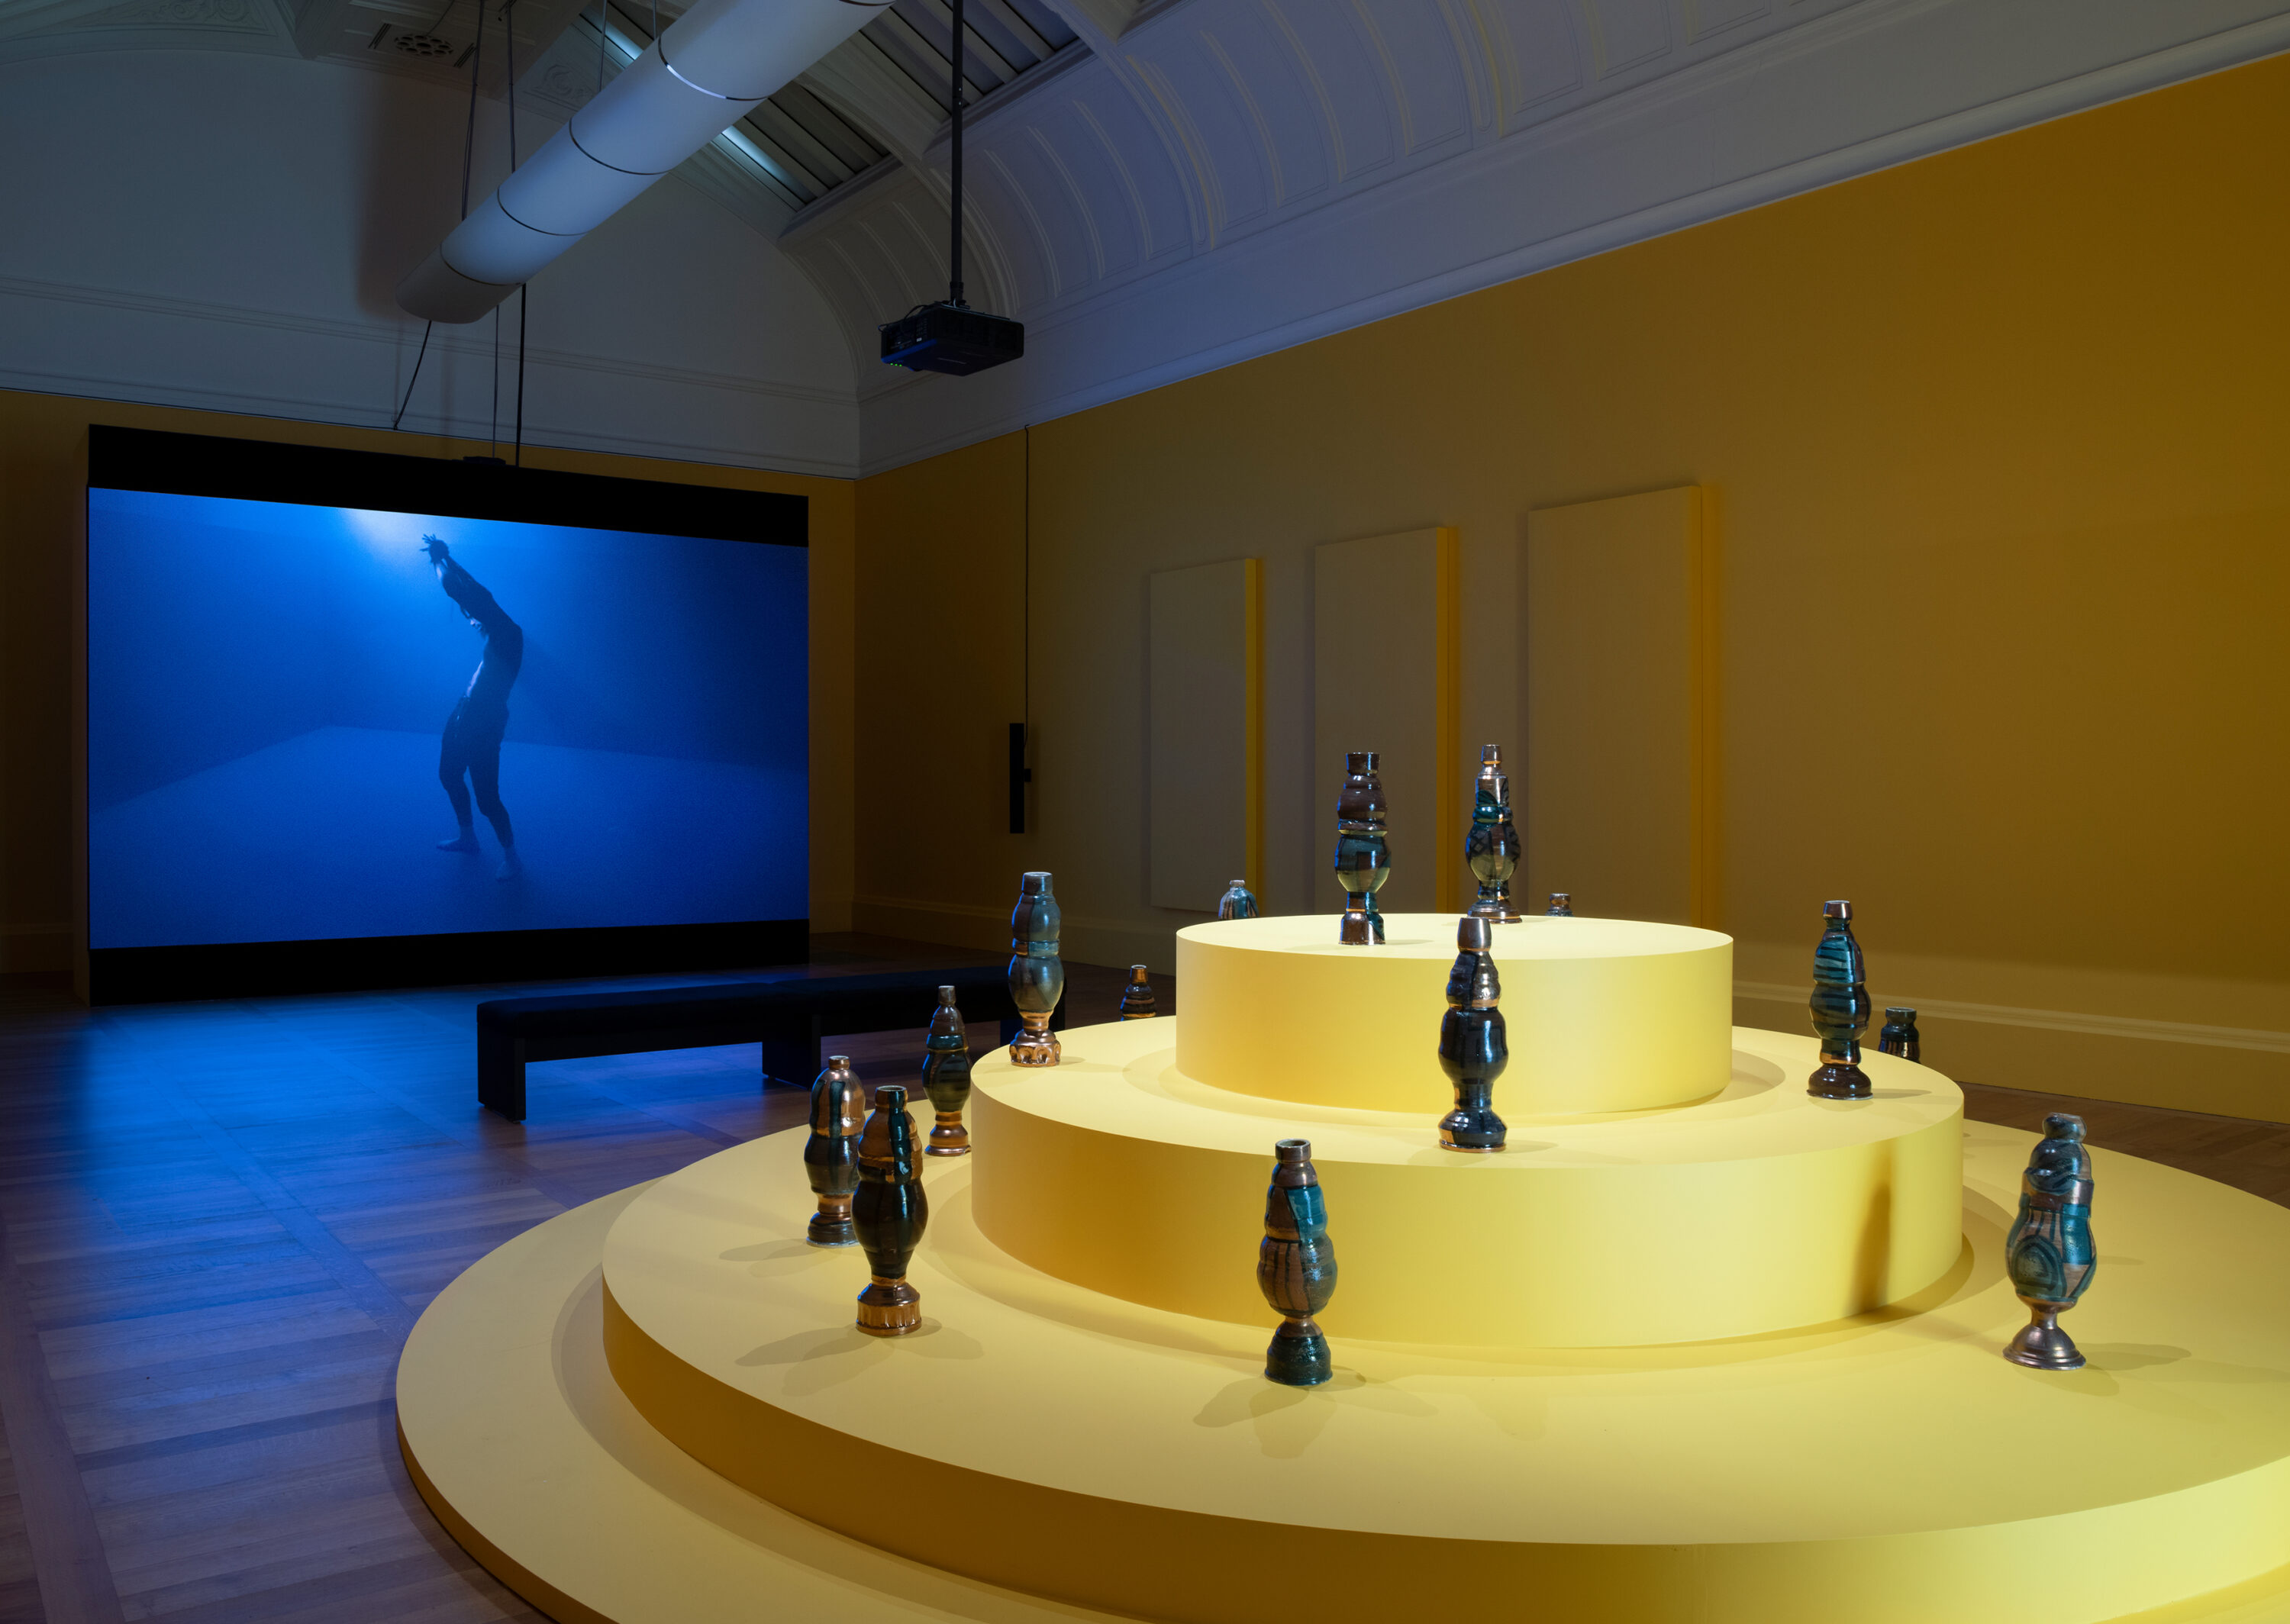 A brightly lit, yellow pedestal composed of four increasingly smaller stacked circles supports multiple thin, vertical ceramic vessels. It occupies the foreground of a barrel-vaulted gallery space with a blue-toned video projected on the back wall. The video shows a single figure in profile posed in the shape of a backward “s.”